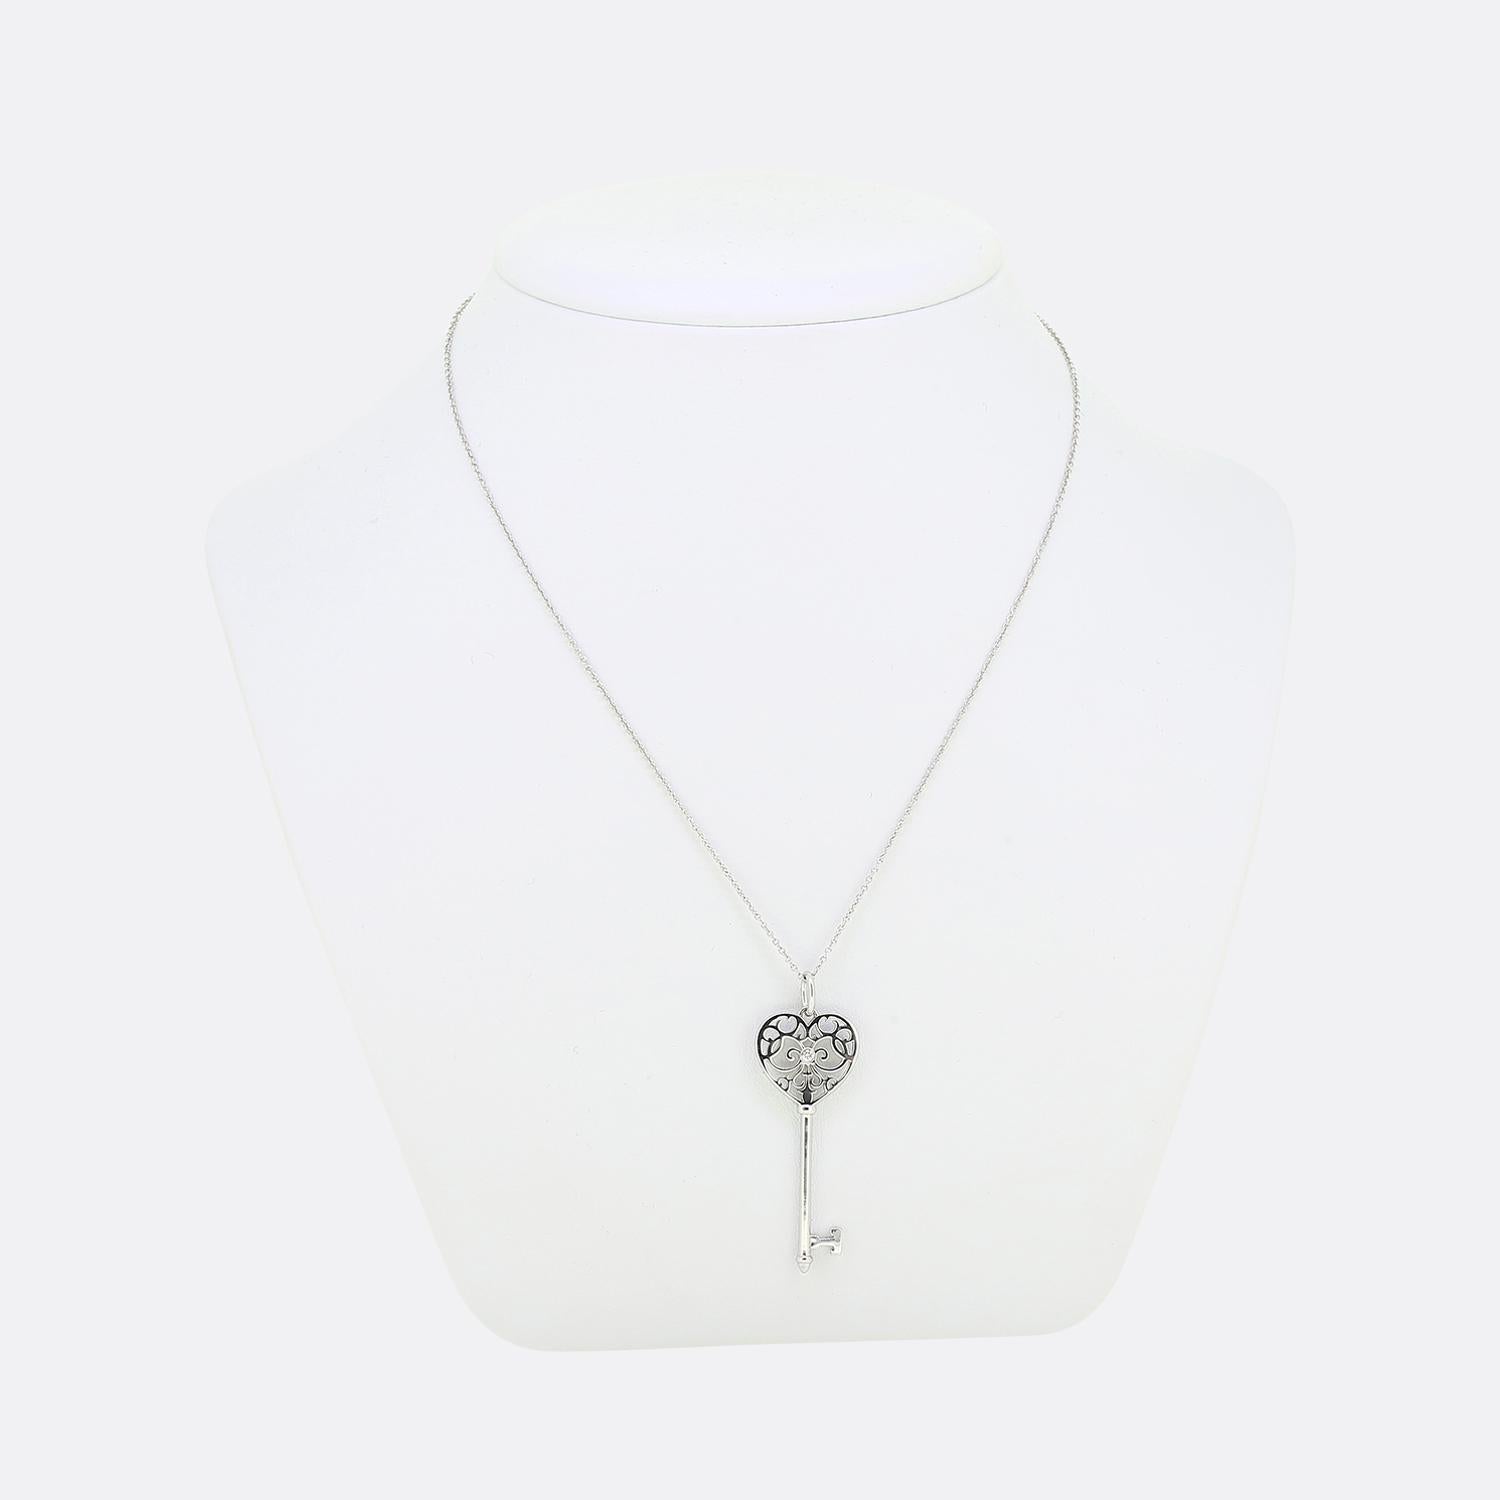 Here we have a beautiful pendant from the world renowned jewellery designer, Tiffany & Co. This piece 18ct white gold forms part of the Tiffany Key collection and showcases an ornate open head which plays host to a single round brilliant cut